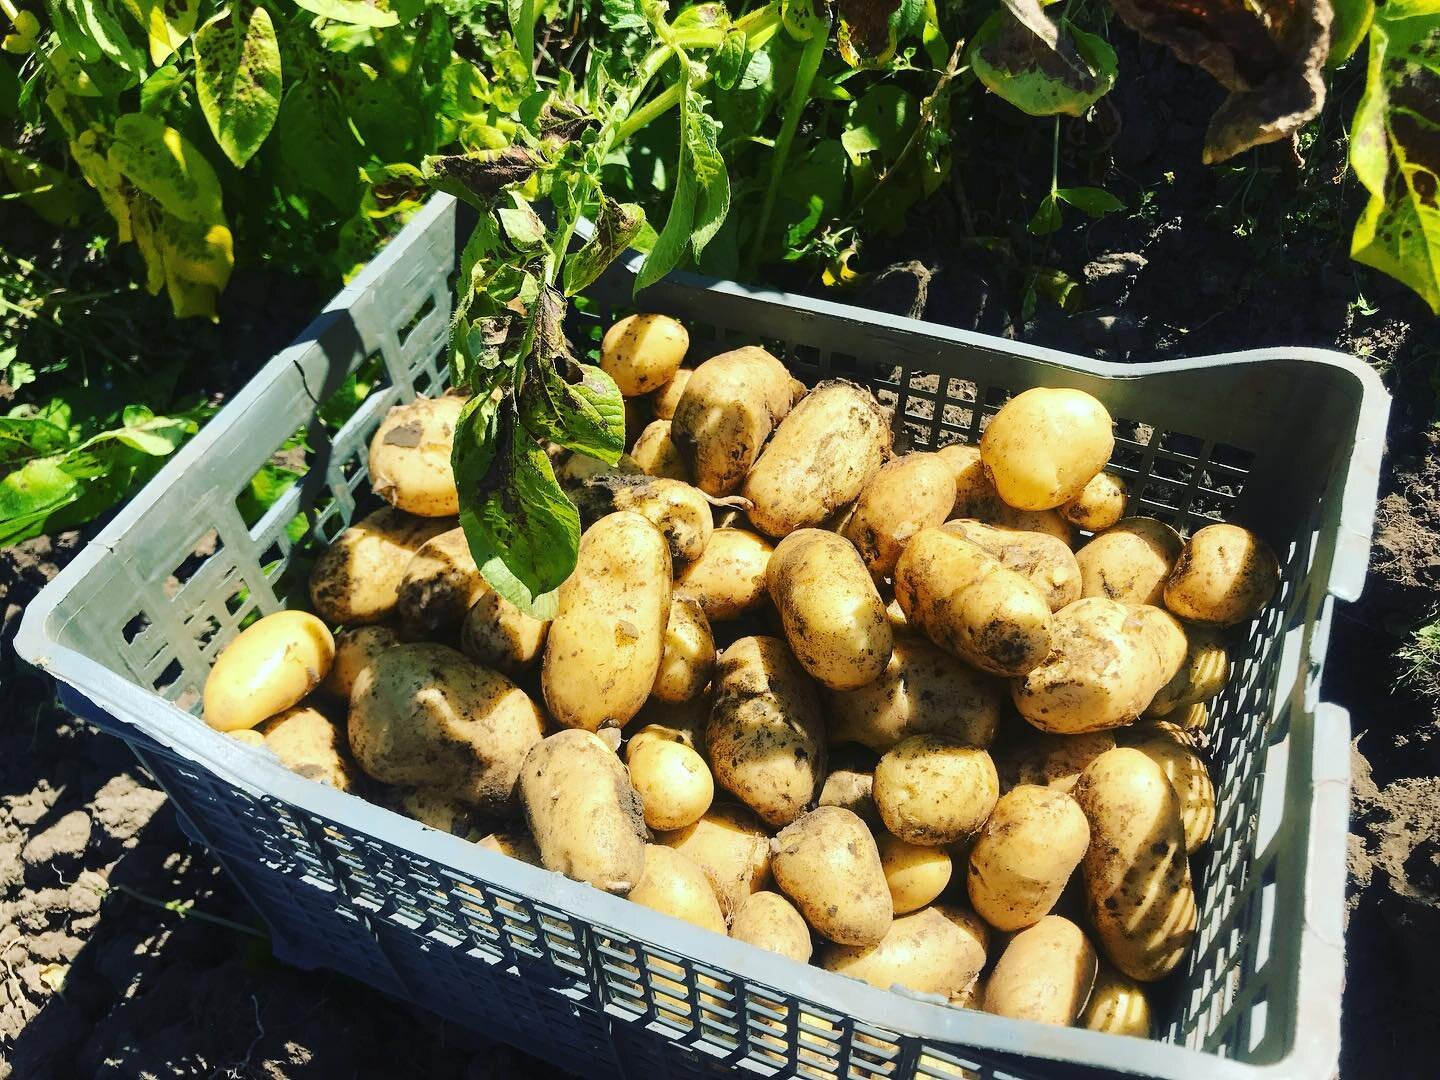 The humble healing potato 

After nearly a month away in Greece, it felt really good to be back at the allotment this morning, especially in the sunshine ☀️ 

These potatoes were amongst the fruits of our labours, with some deep digging required to u